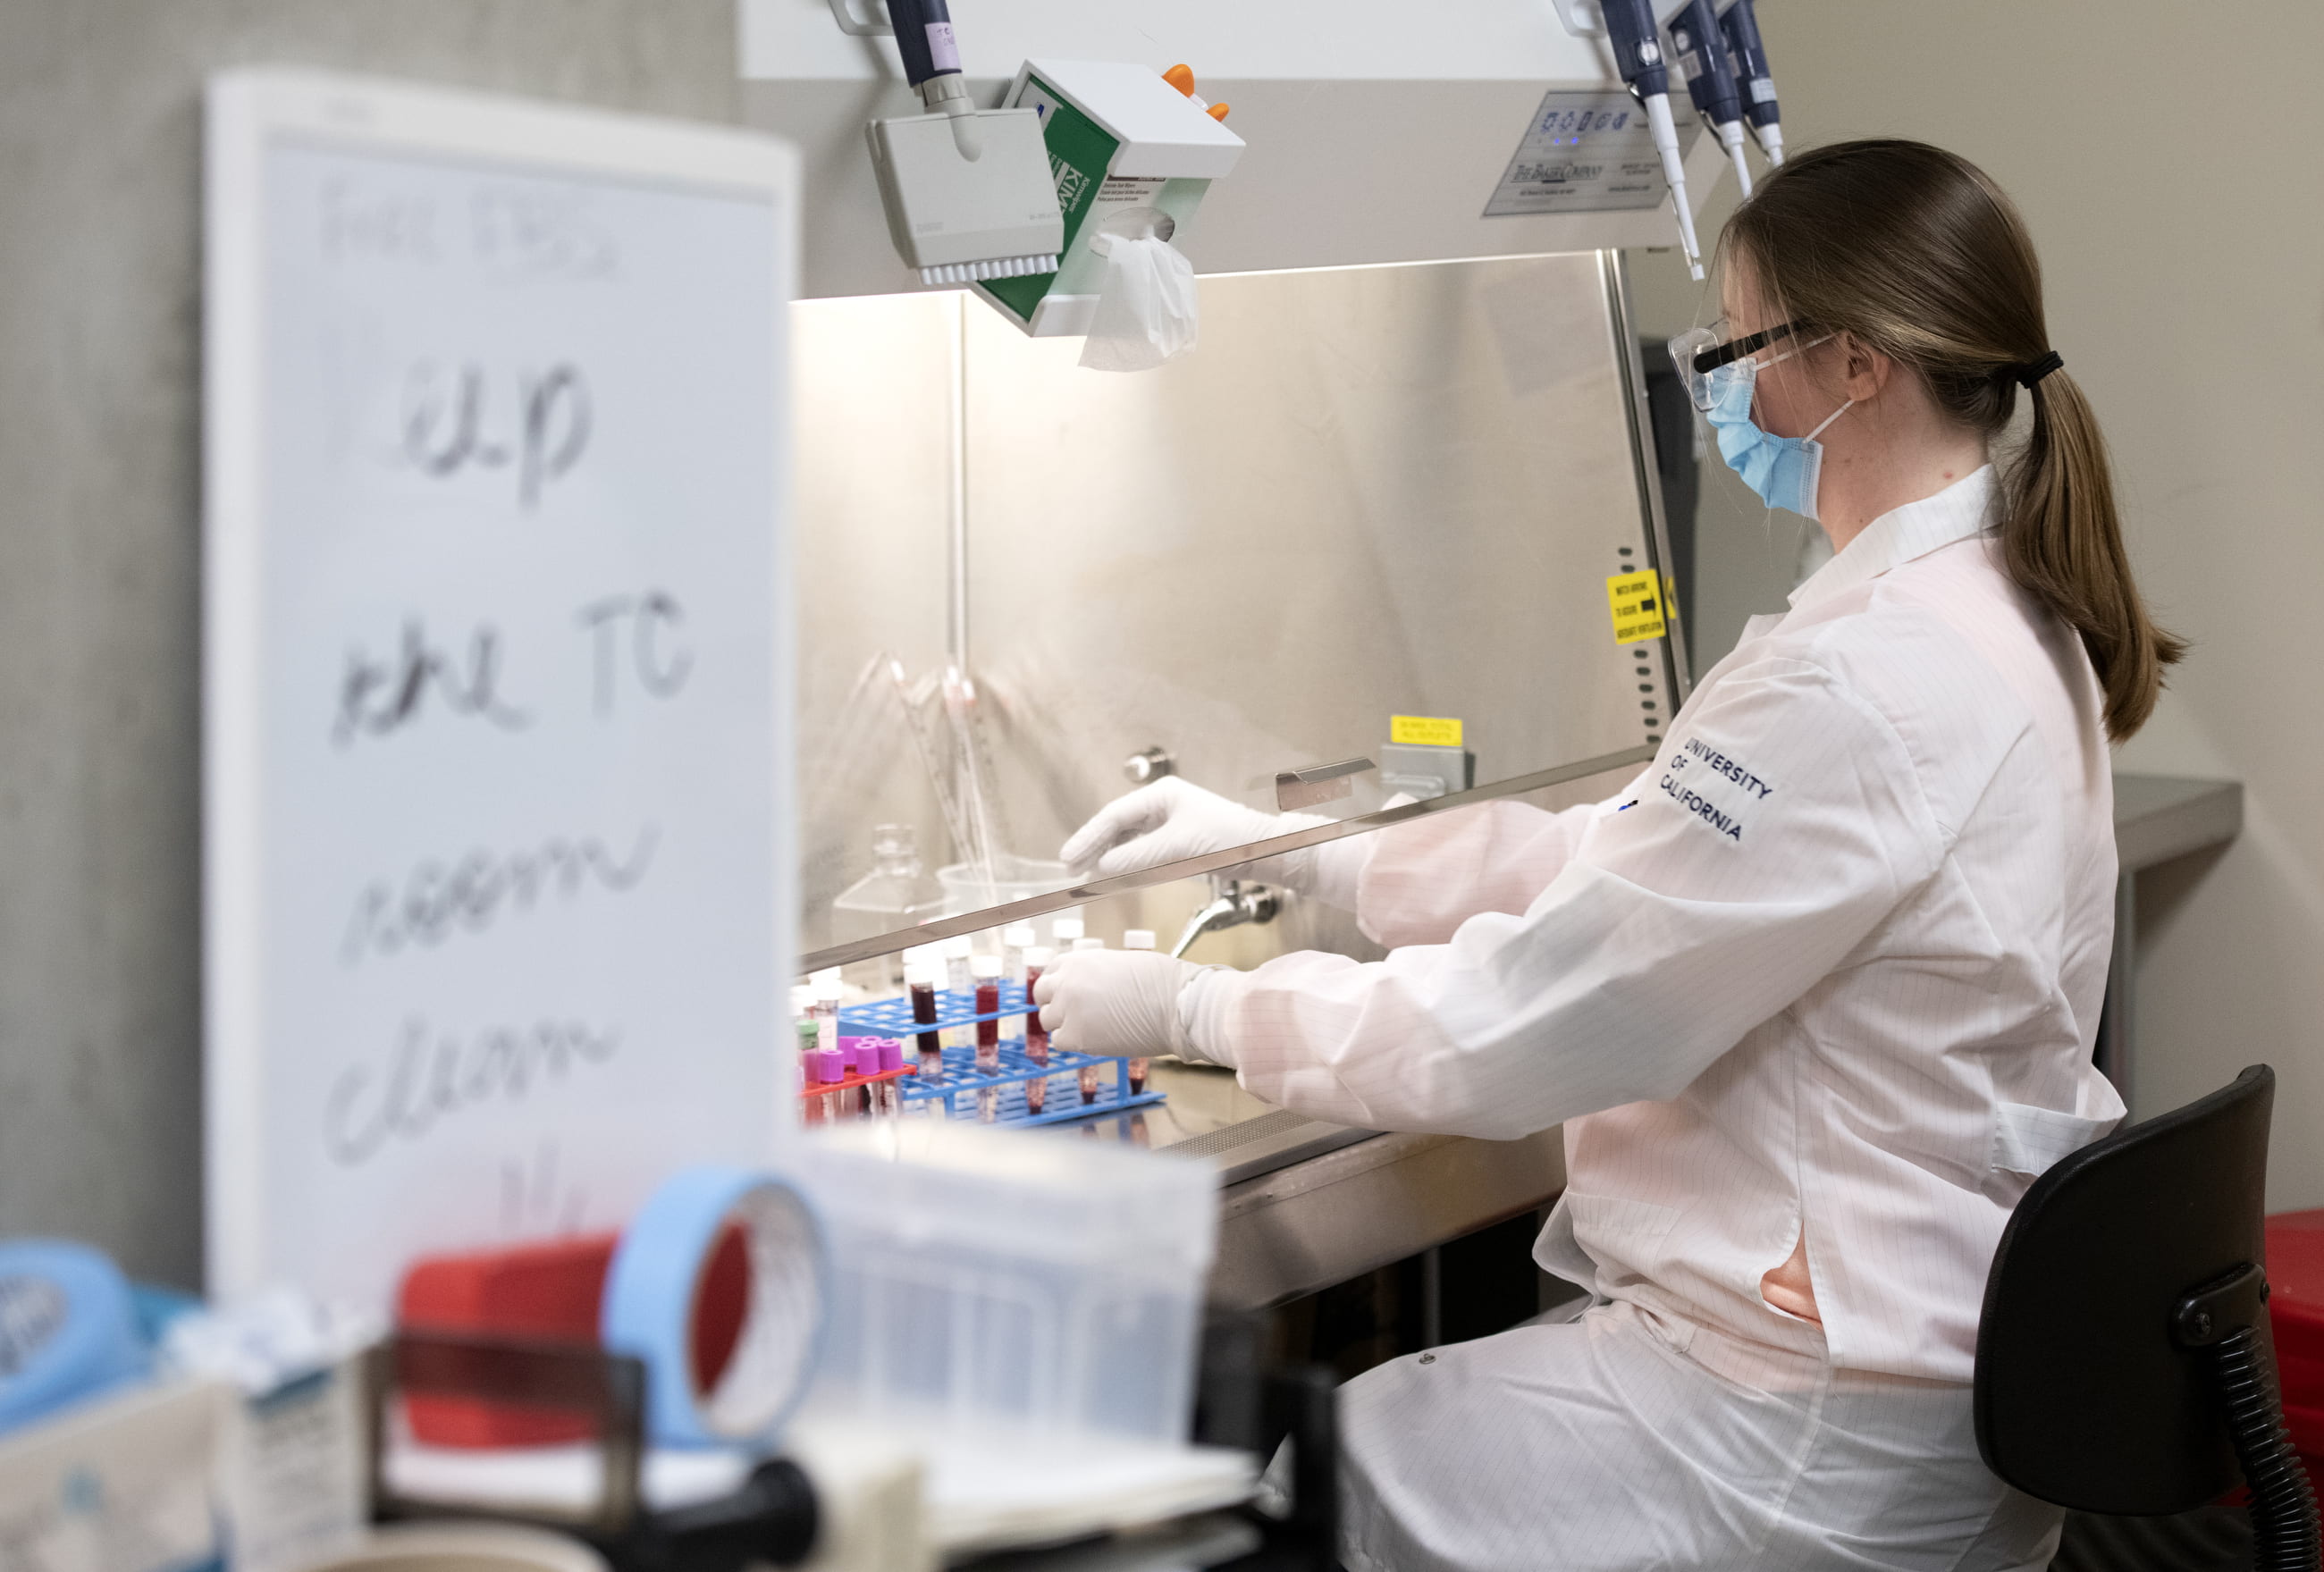 Ilhem Messaoudi, professor of molecular biology & biochemistry, (pictured in her lab) is part of a UCI research team using a CRAFT-COVID grant to study the prevalence of undetected COVID-19 among healthcare providers at the UCI Medical Center.